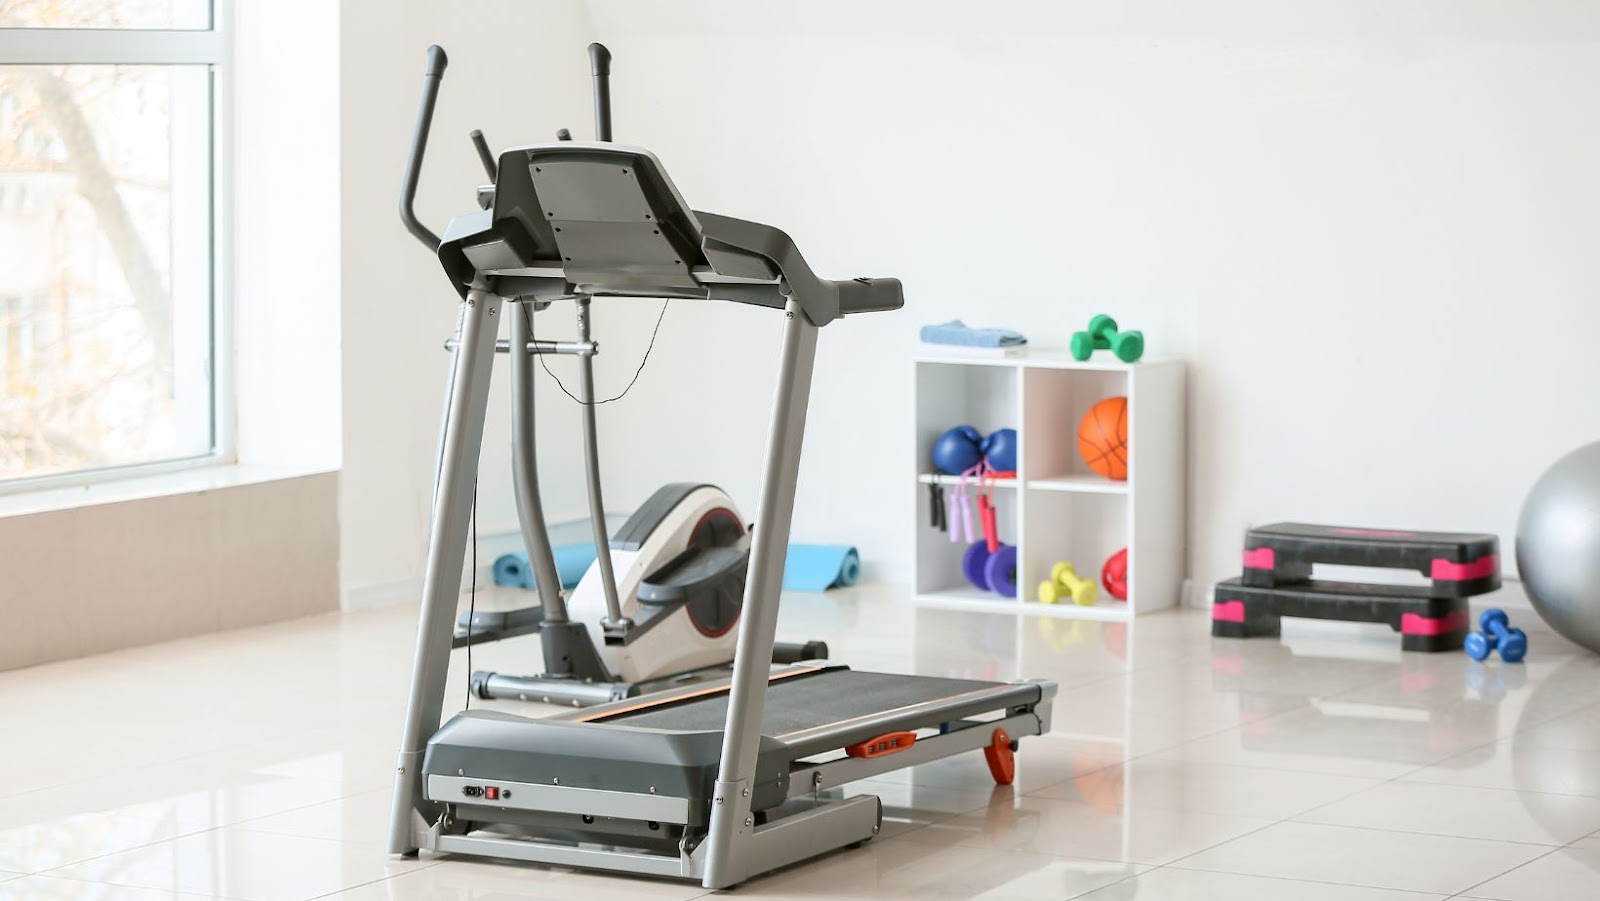 What To Look For When Buying A Treadmill?